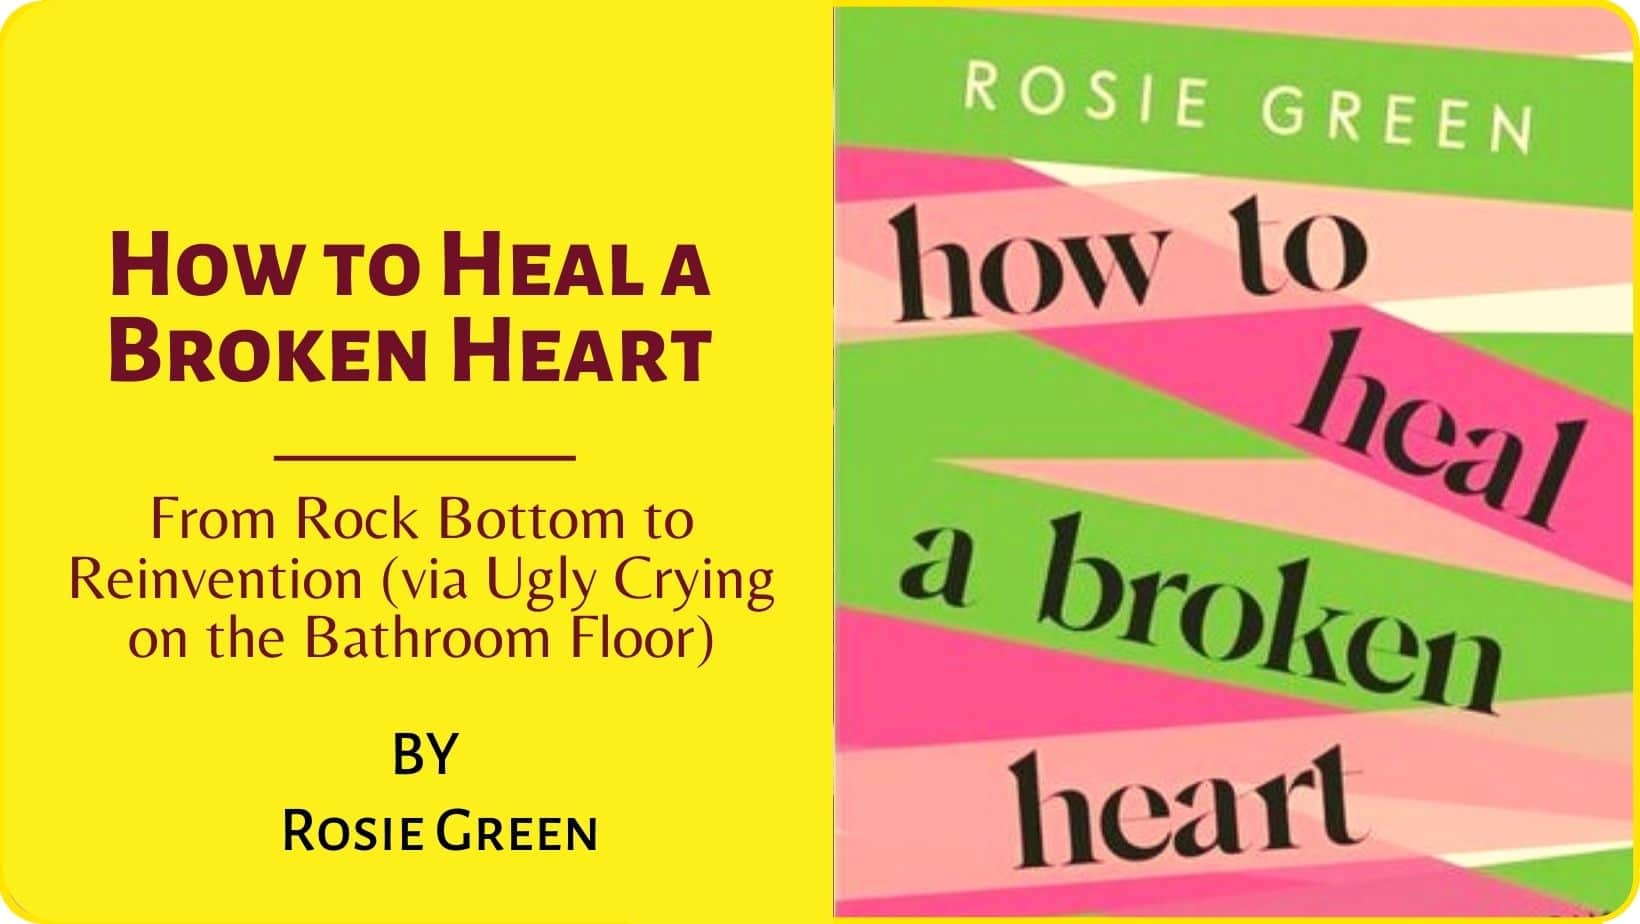 How to Heal a Broken Heart by Rosie Green